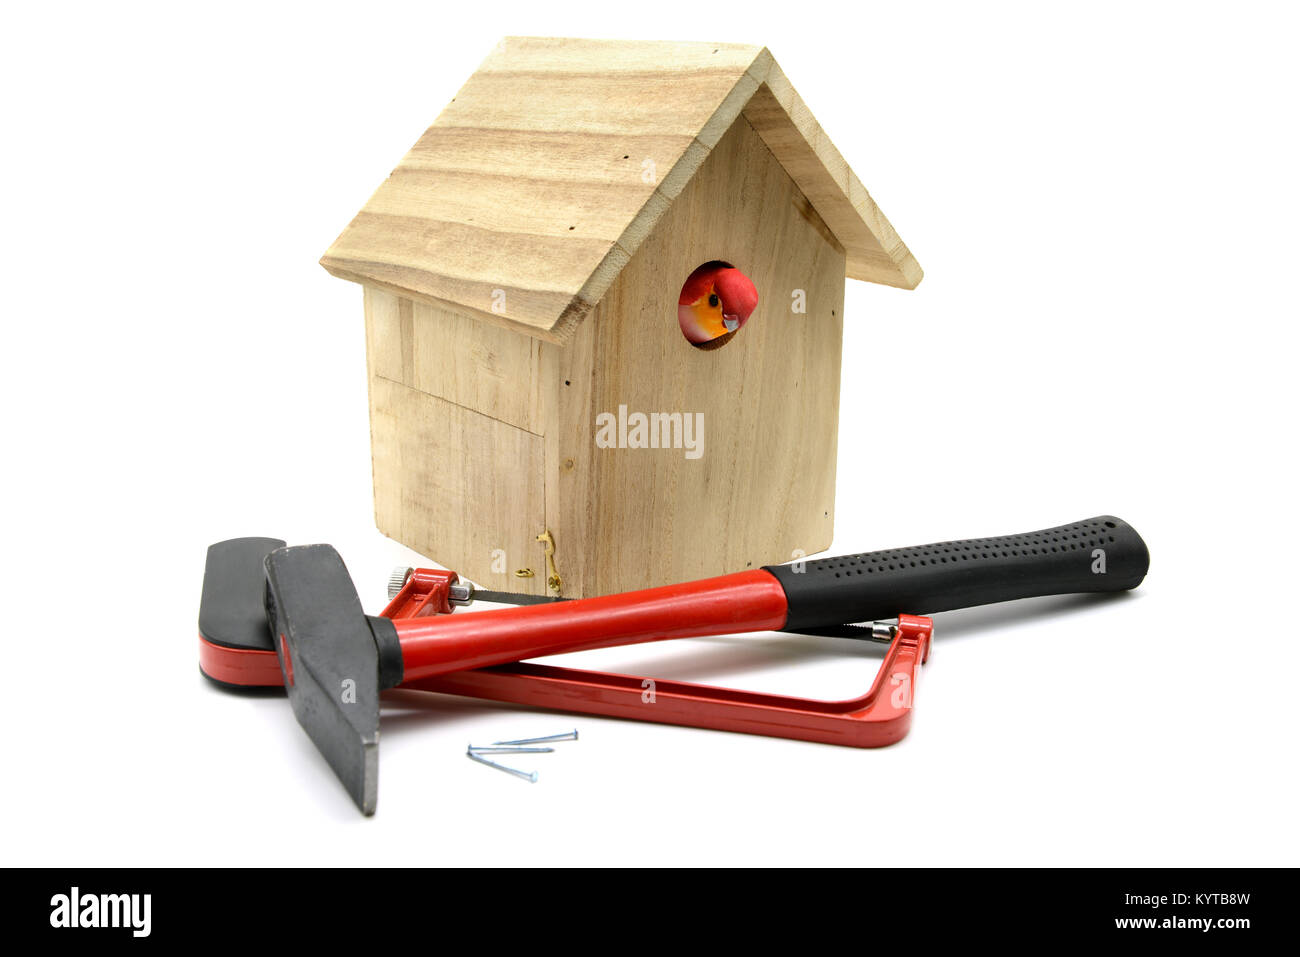 building bird nesting box with hammer, nails and saw. bird looking out of nestbox. white isolated background Stock Photo